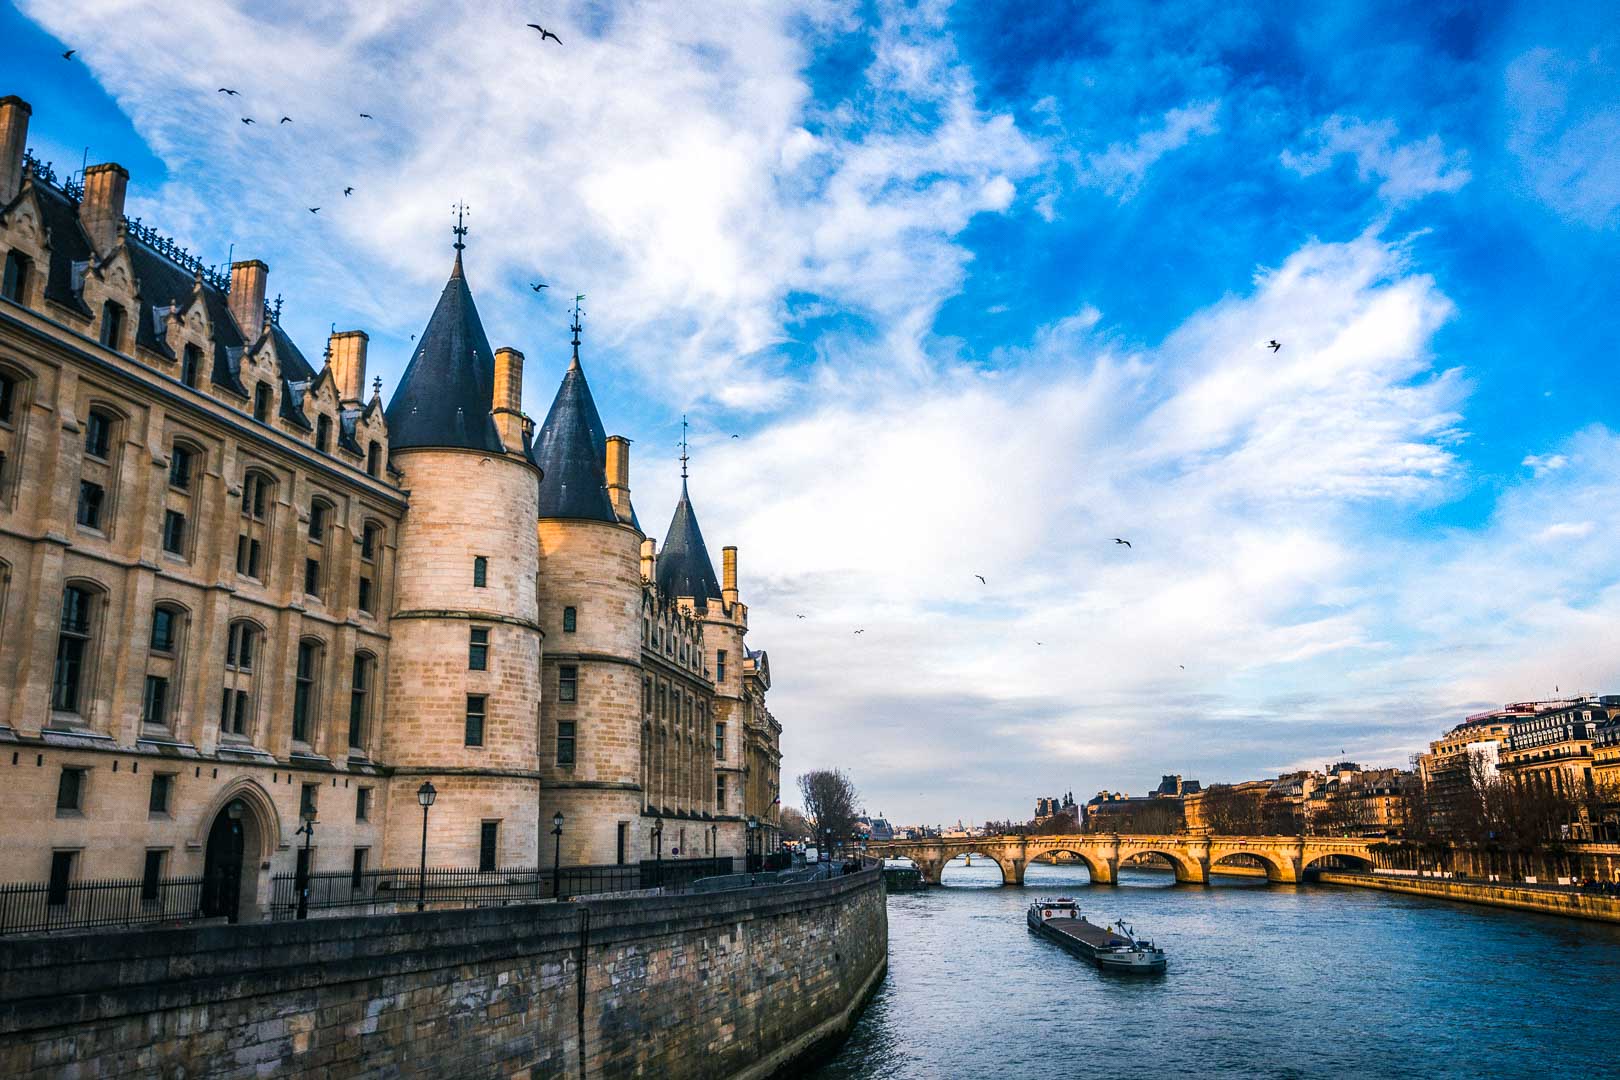 Conciergerie, Paris – A Fortress in the Heart of Paris (and a prison too!)